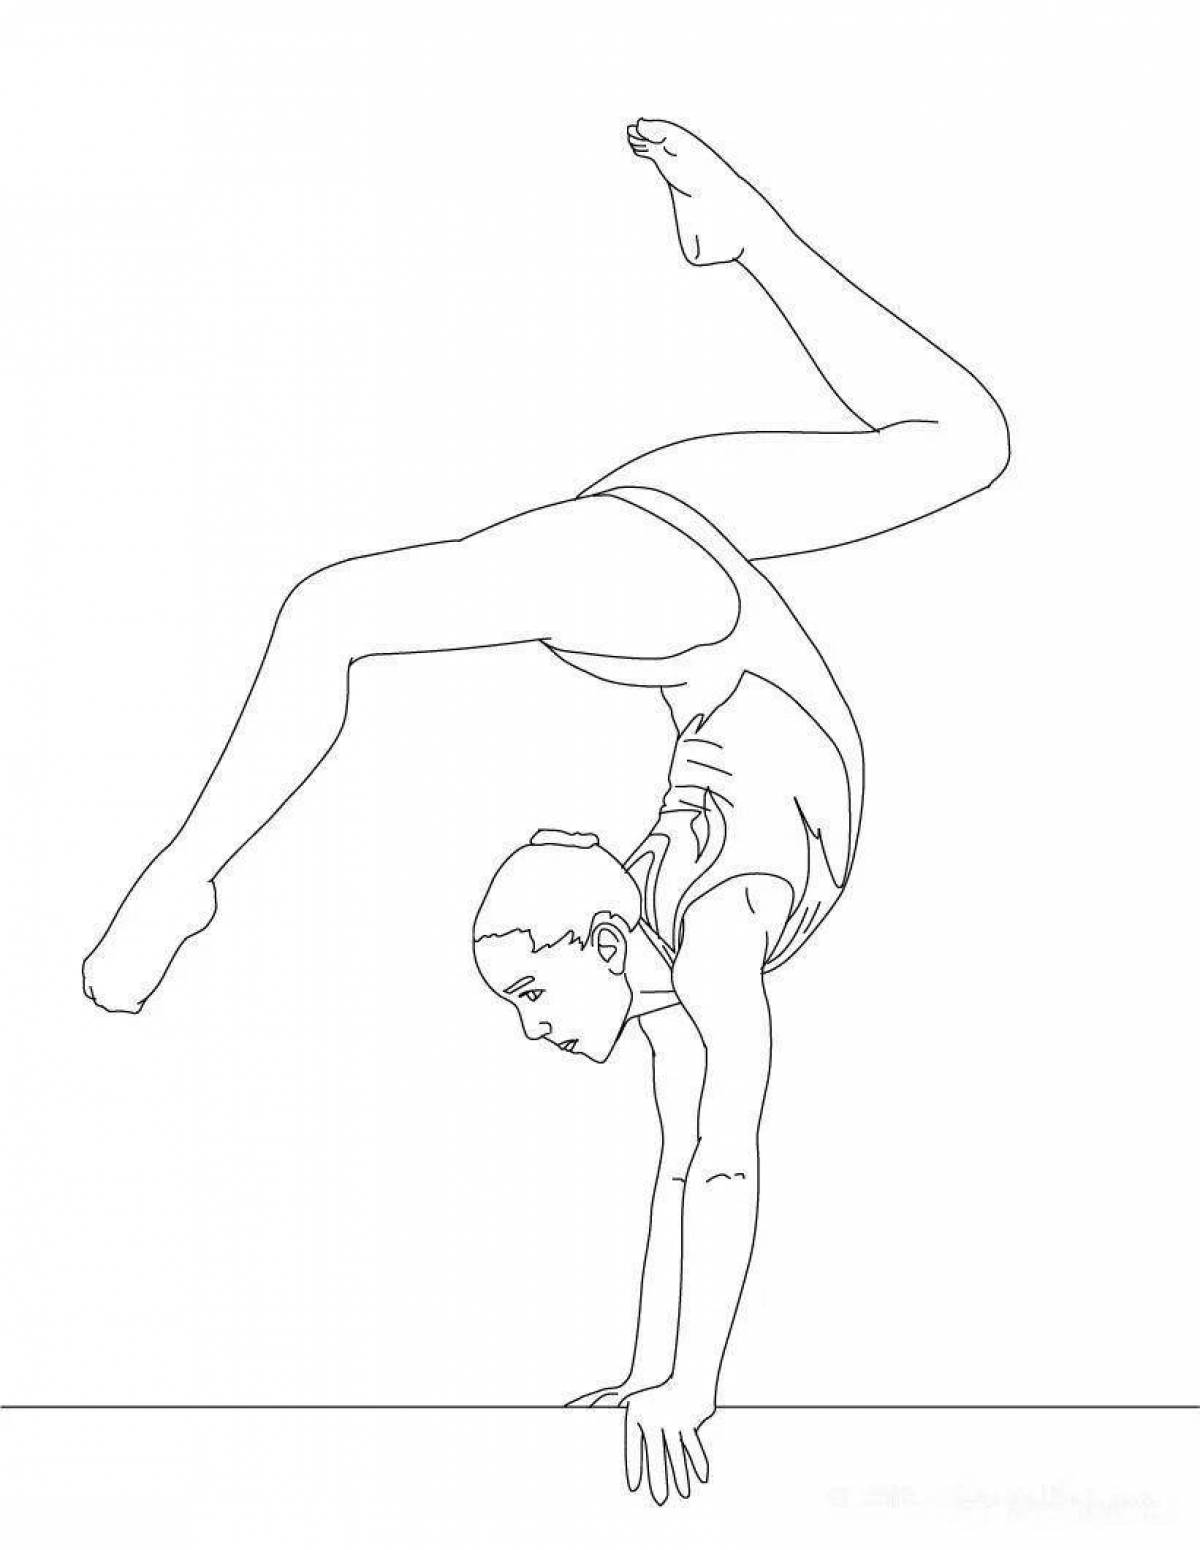 Glorious gymnast coloring pages for kids